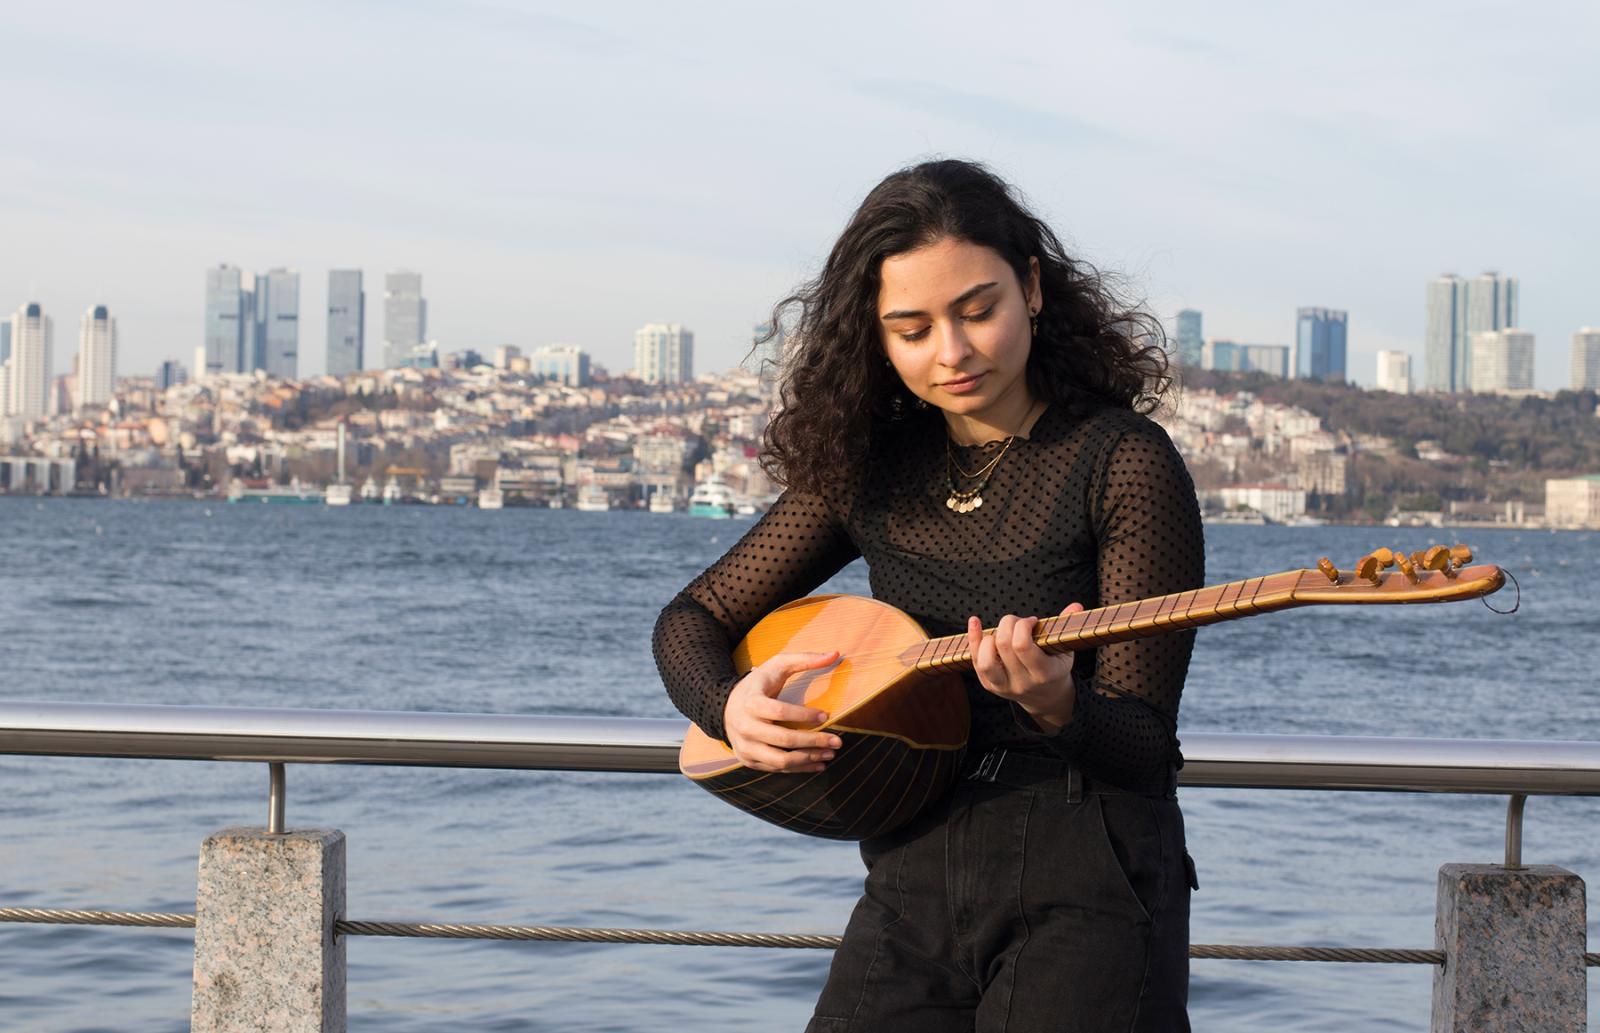 A woman plays a stringed instrument, with water and a city skyline behind her.